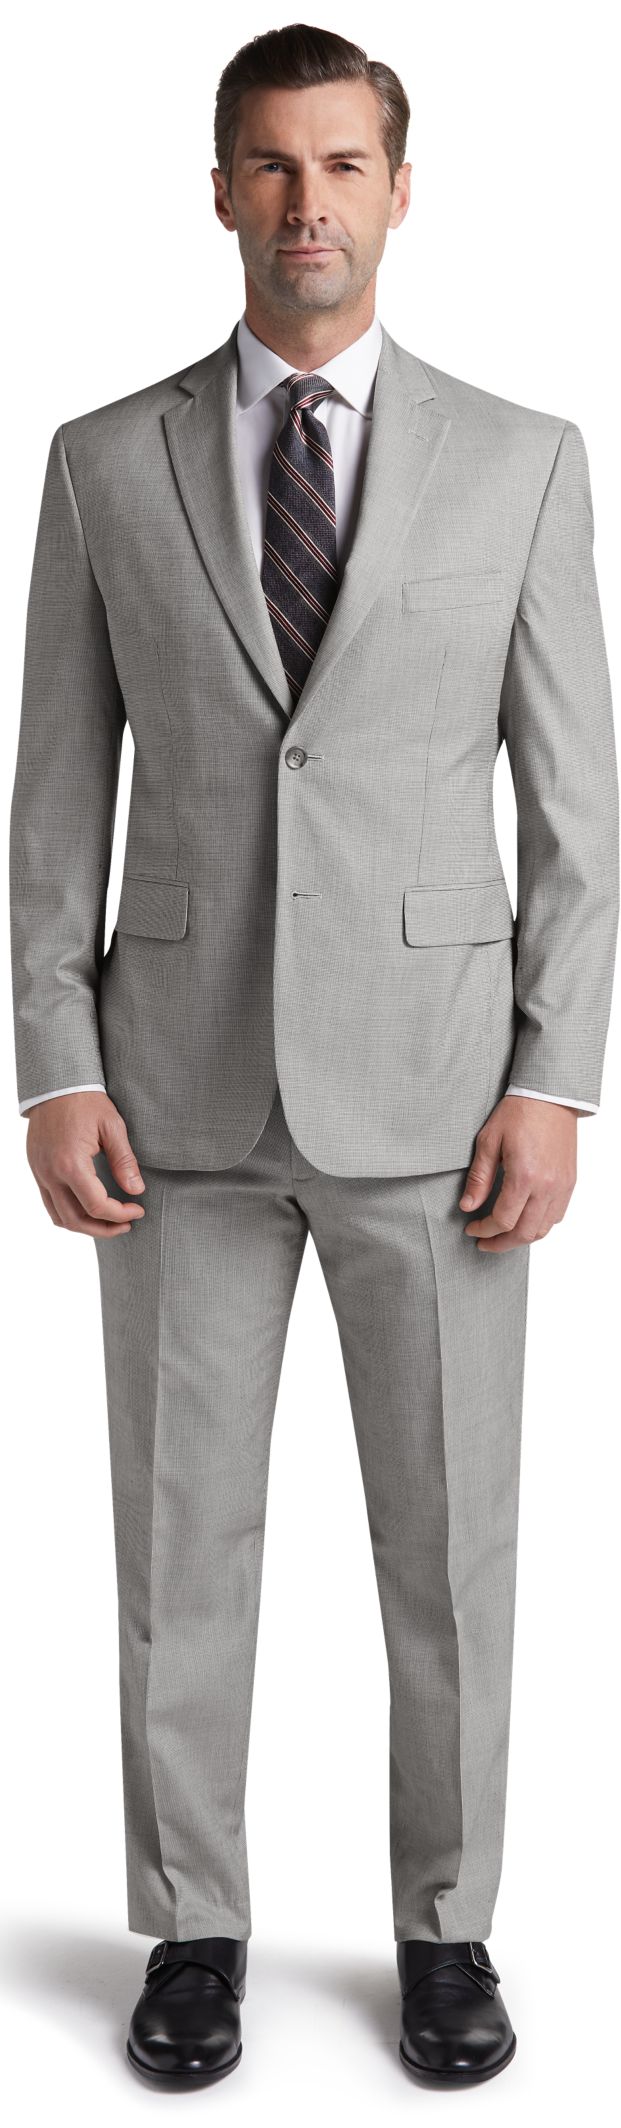 Executive Tropical Blend Tailored Fit Suit CLEARANCE - All Clearance ...